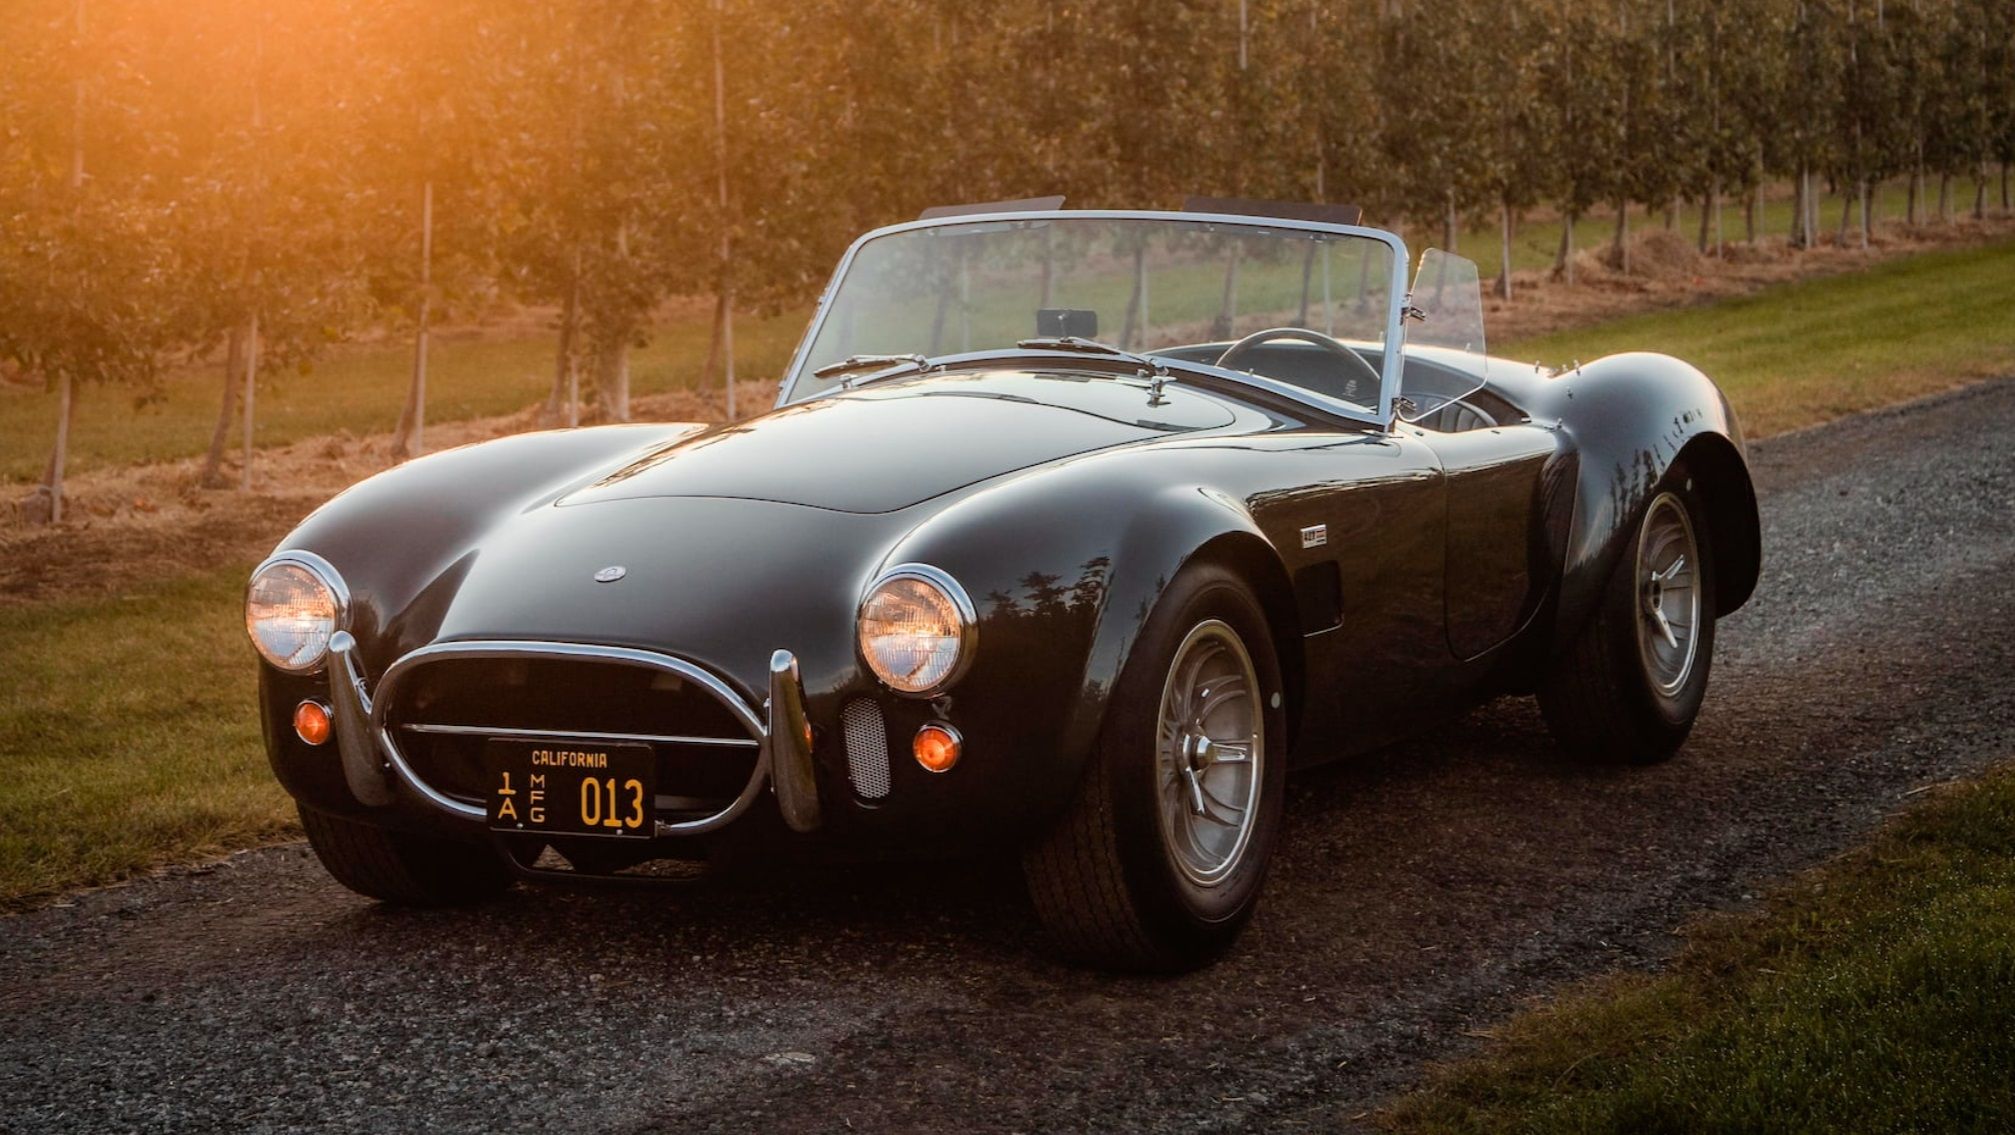 The 1965 Shelby Cobra 427 Roadster